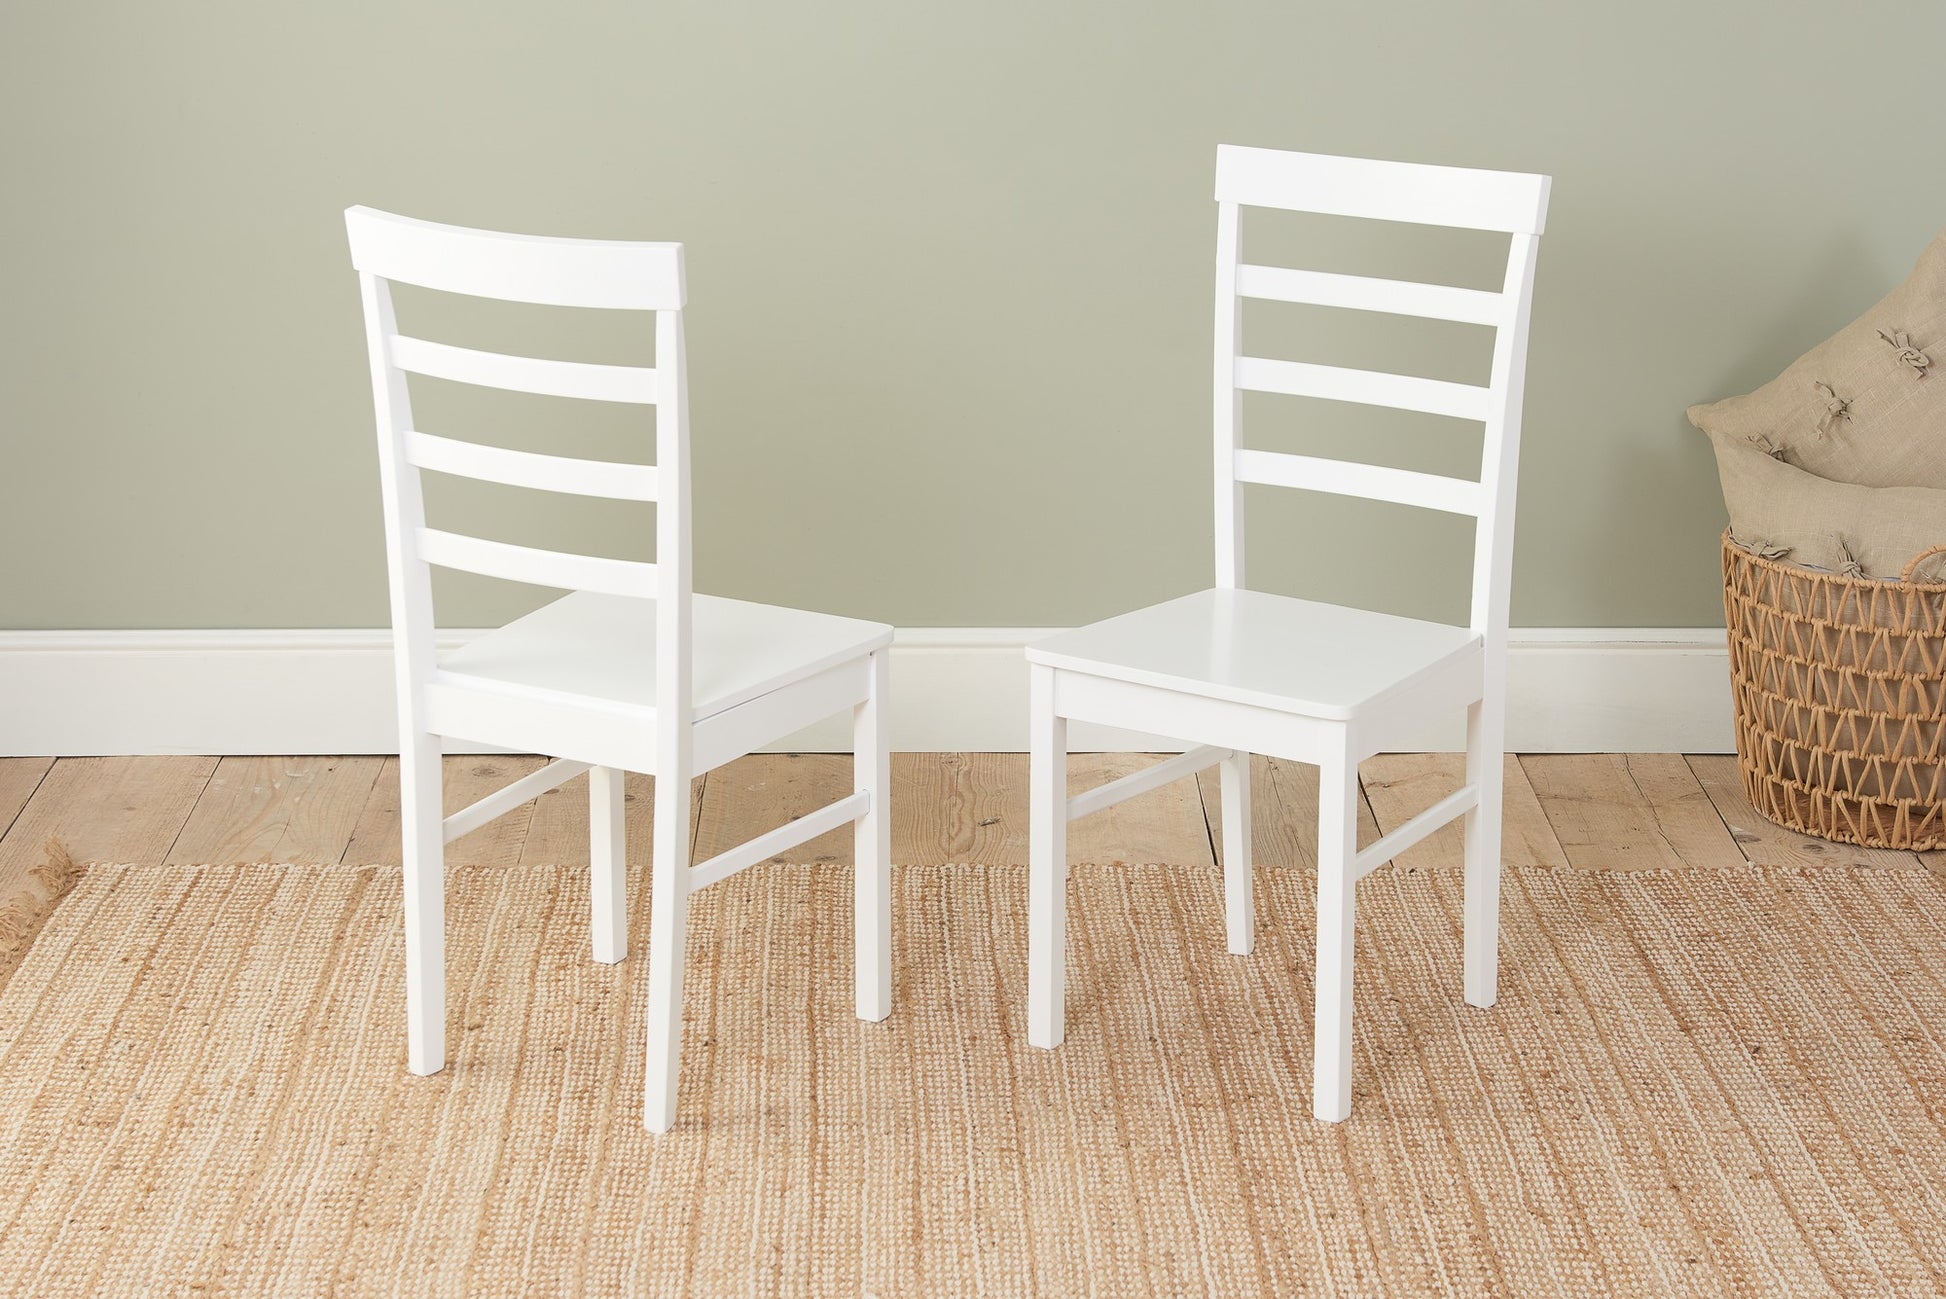 Upton Ladder Back Dining Chairs with Wooden Seat and Sturdy Cross-Bar Design